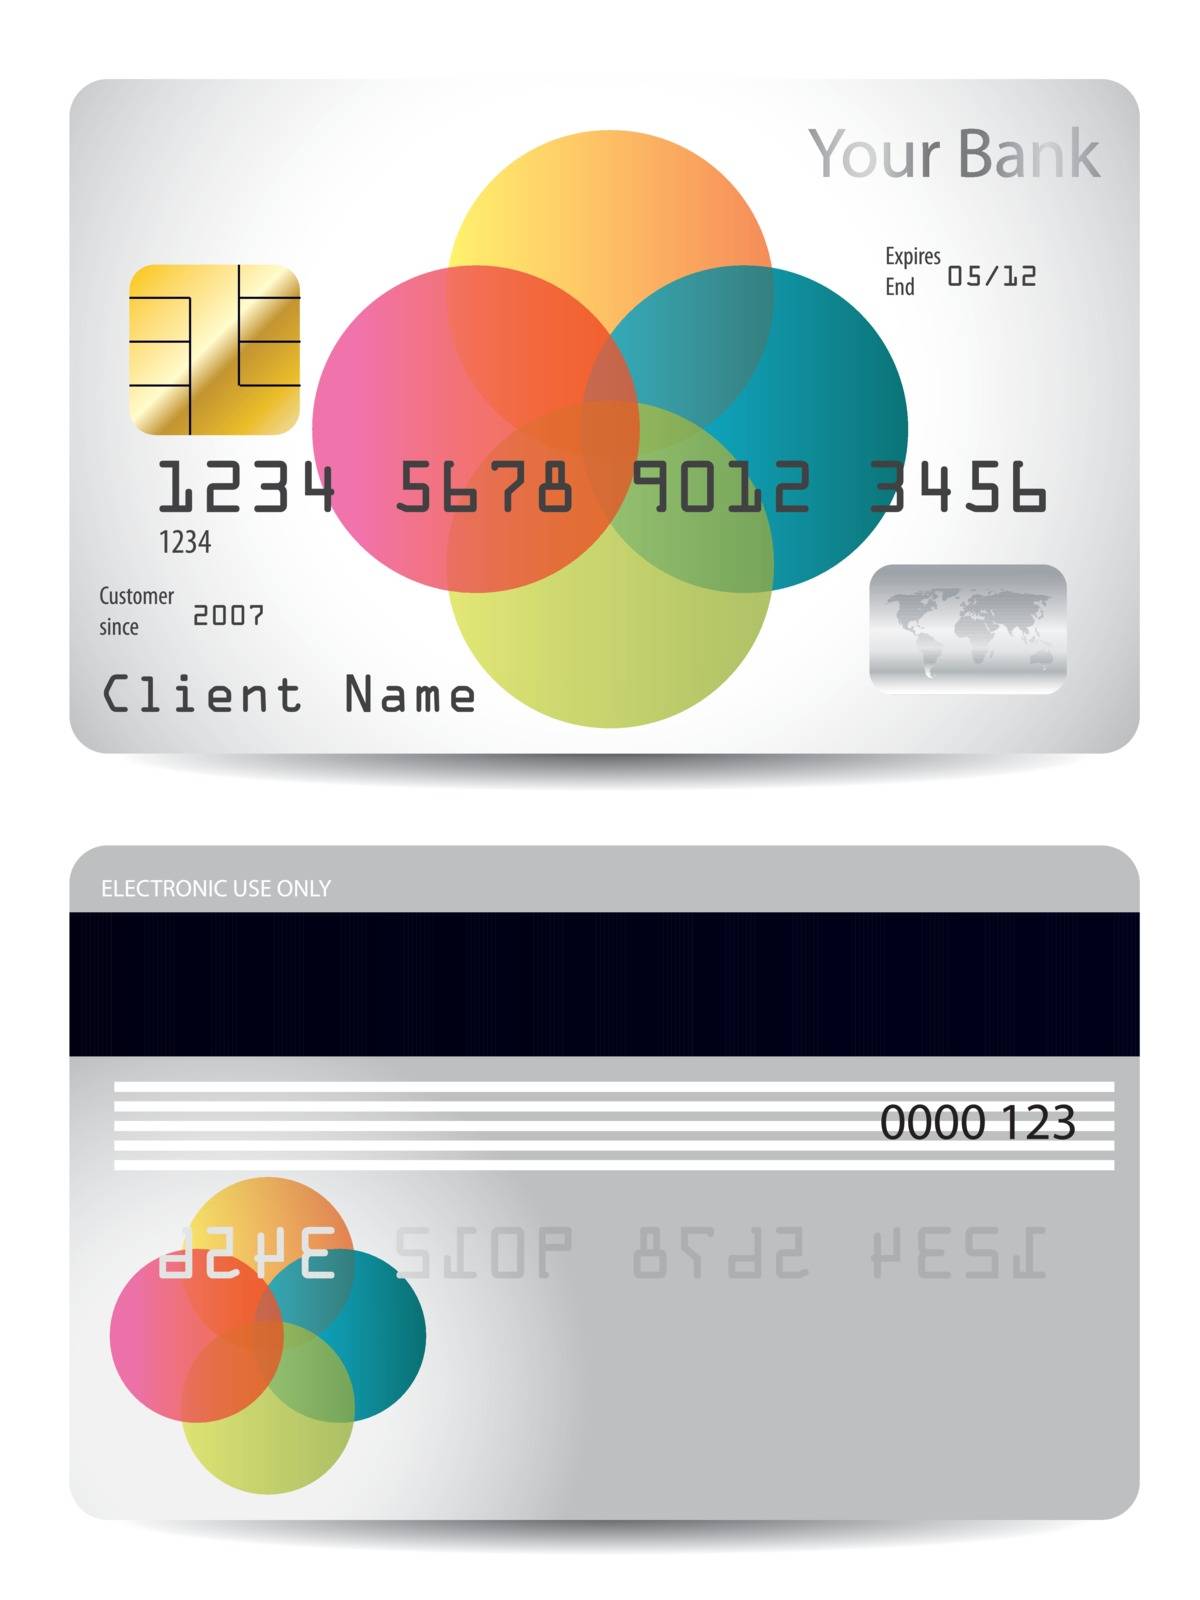 Credit card design with color dots and gray background